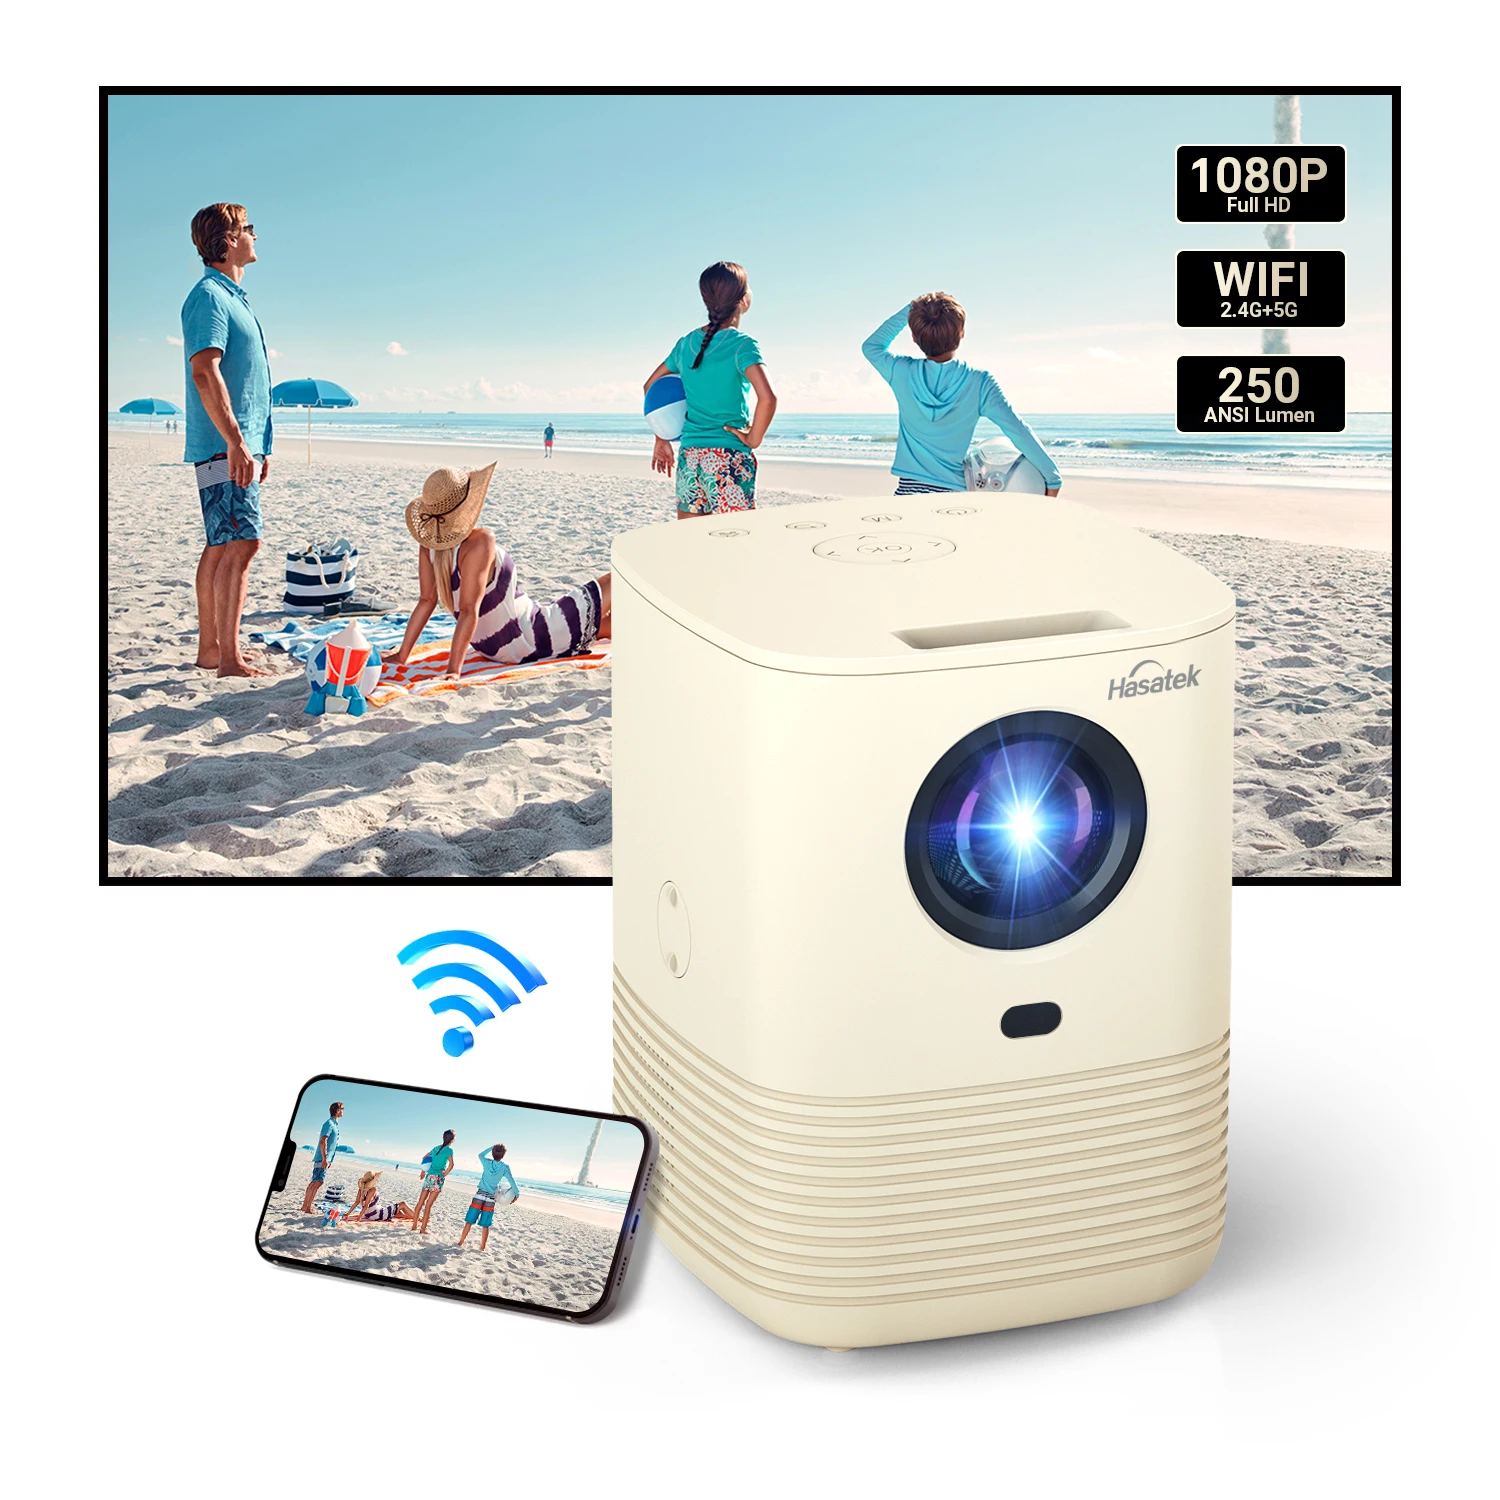 veld Bekijk het internet stroom Full Hd Mini Projector 1080p Wifi Mirroring For Smartphone Iphone 6000 Lux  Projector For Home Theater Beamer - Buy Full Hd Mini Projector,Projector  1080p,Projector 1080p Wifi Mirroring Product on Alibaba.com